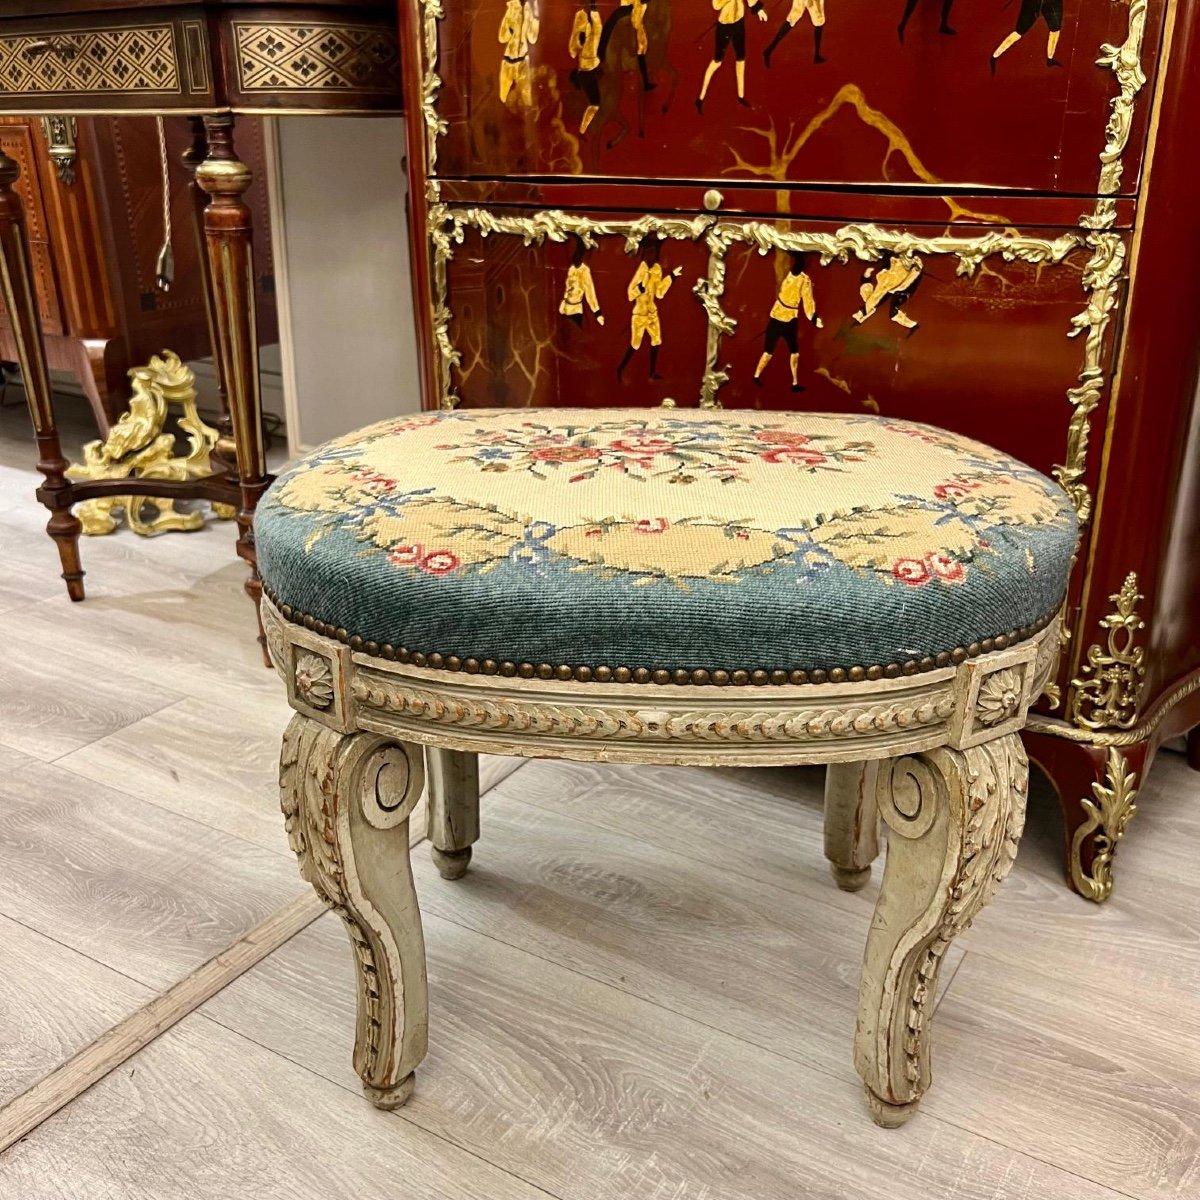 19th Century Lacquered Wooden Stool in Louis XV Transition Style  For Sale 3